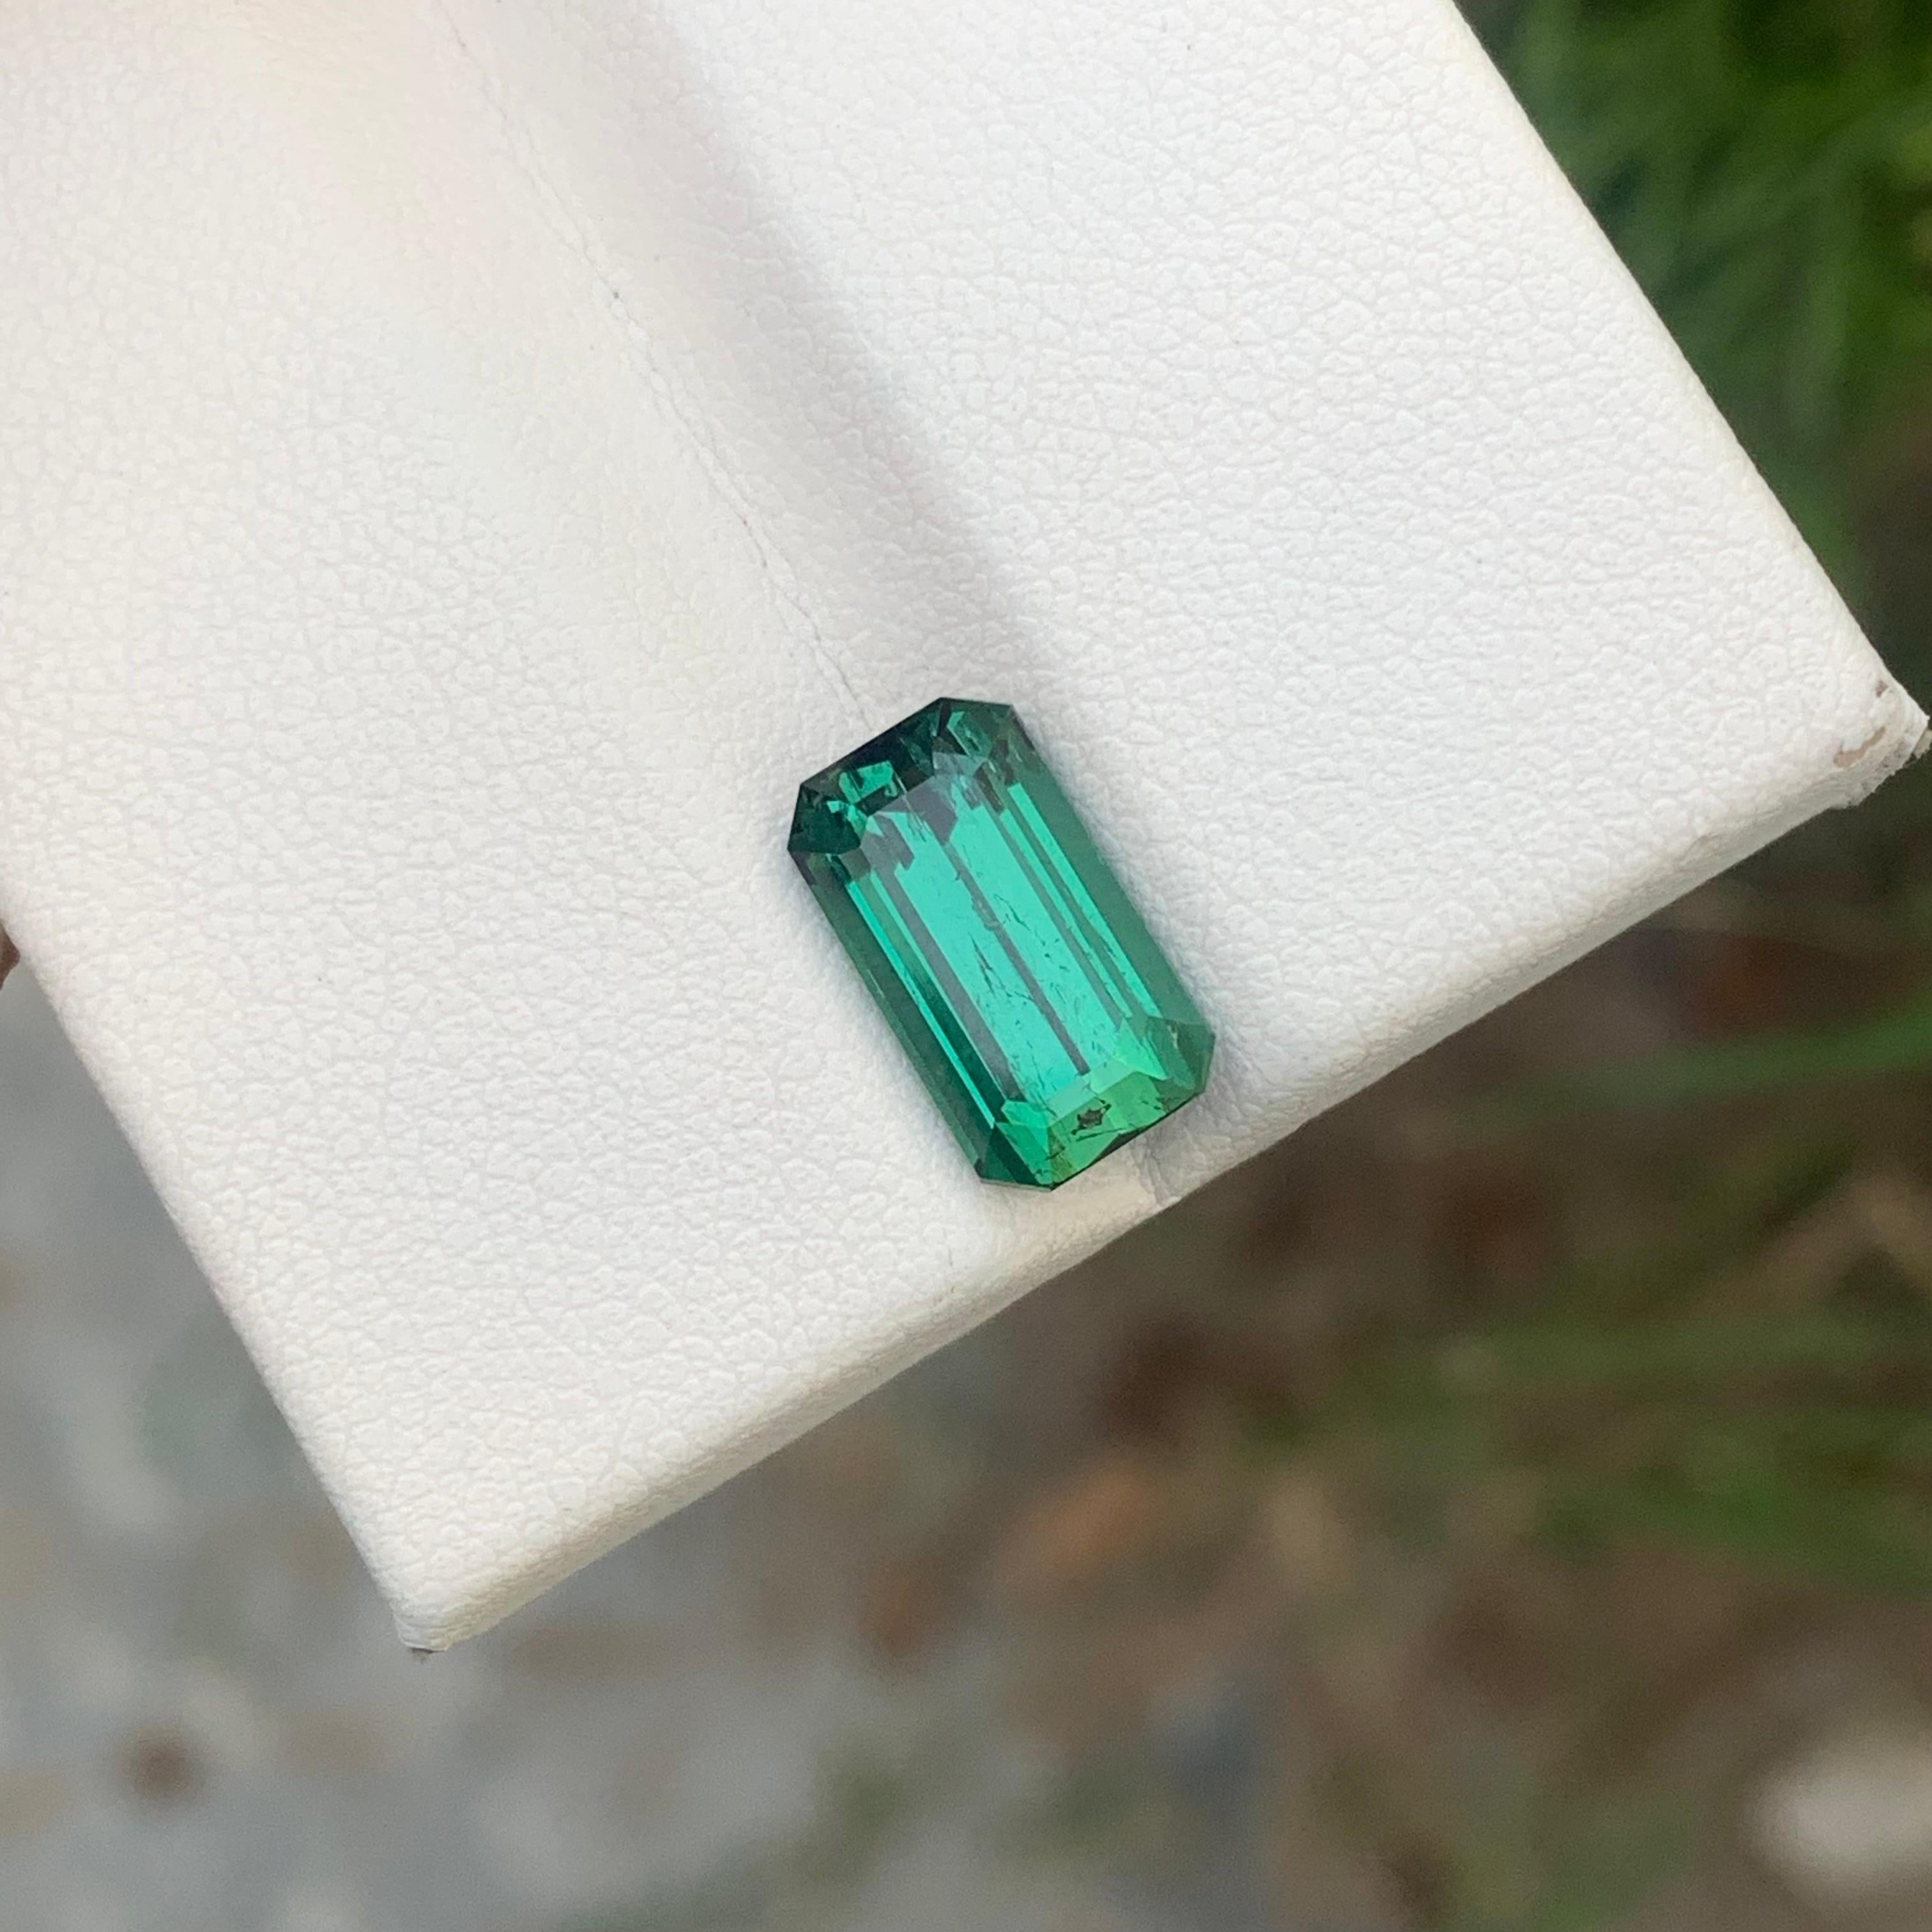 Loose Tourmaline 
Weight: 3.80 Carats 
Dimension: 11.5x6.6x5.7 Mm
Origin: Kunar Afghanistan 
Shape: Emerald 
Color: Lagoon Green
Treatment: Non
Certificate: On Demand 
Lagoon tourmaline, a captivating member of the tourmaline family, derives its